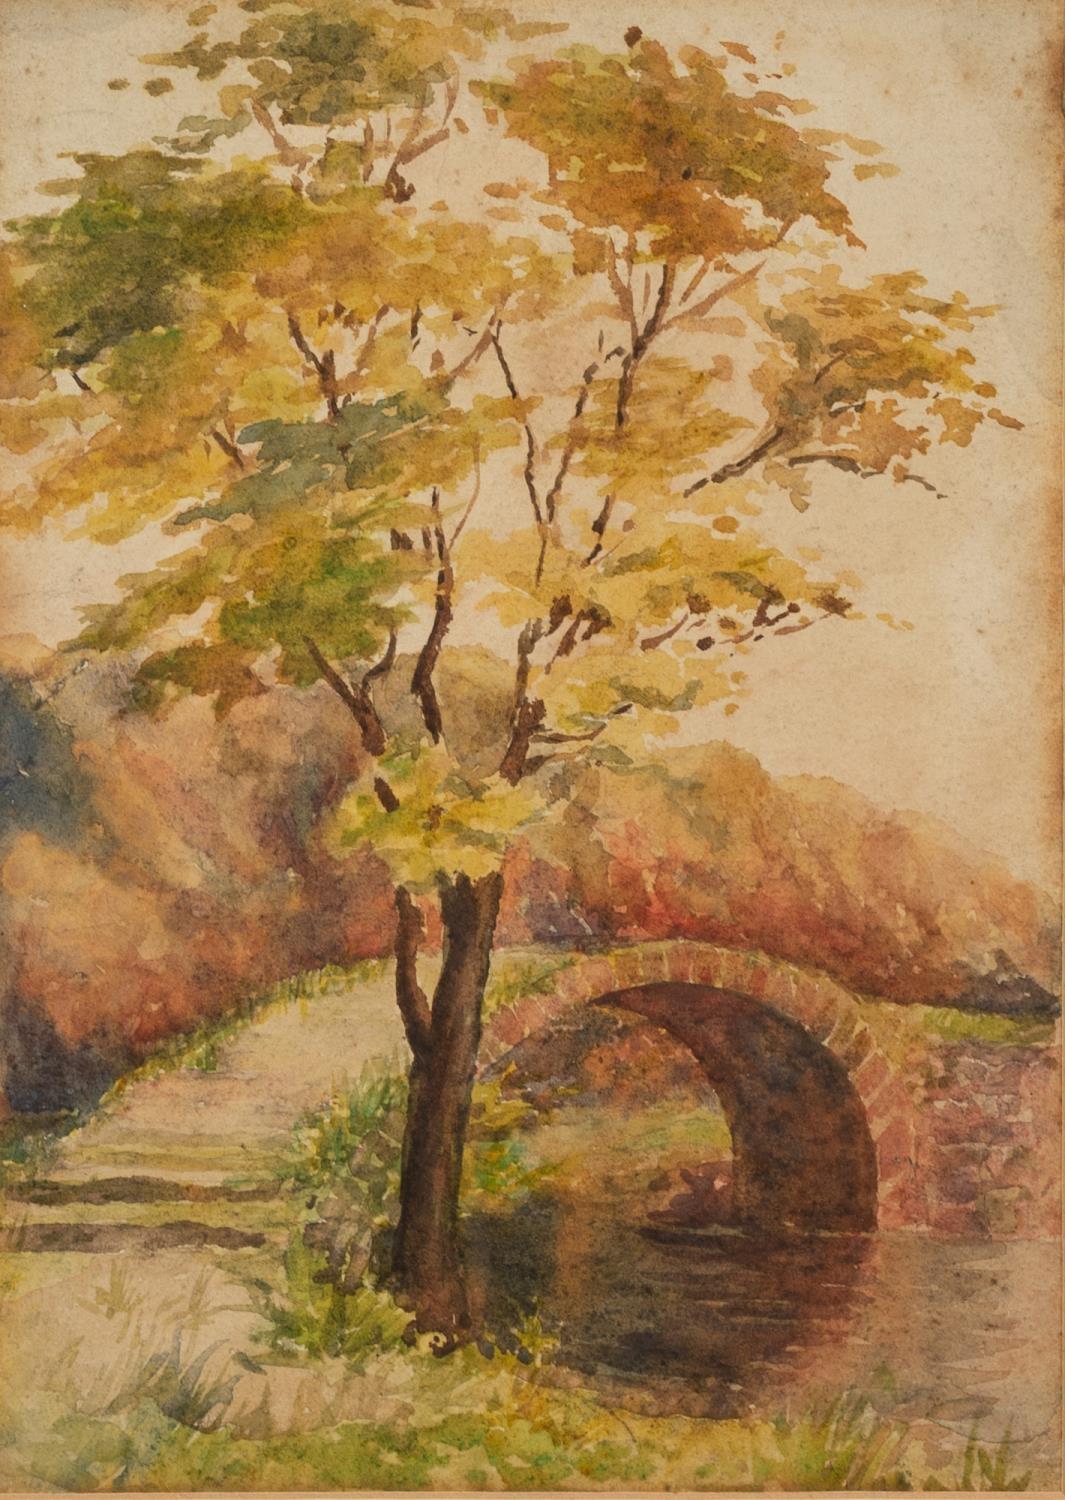 ATTRIBUTED TO WILLIAM SMALLWOOD WINDER (1869-1910) WATERCOLOUR DRAWING River scene with stone bridge